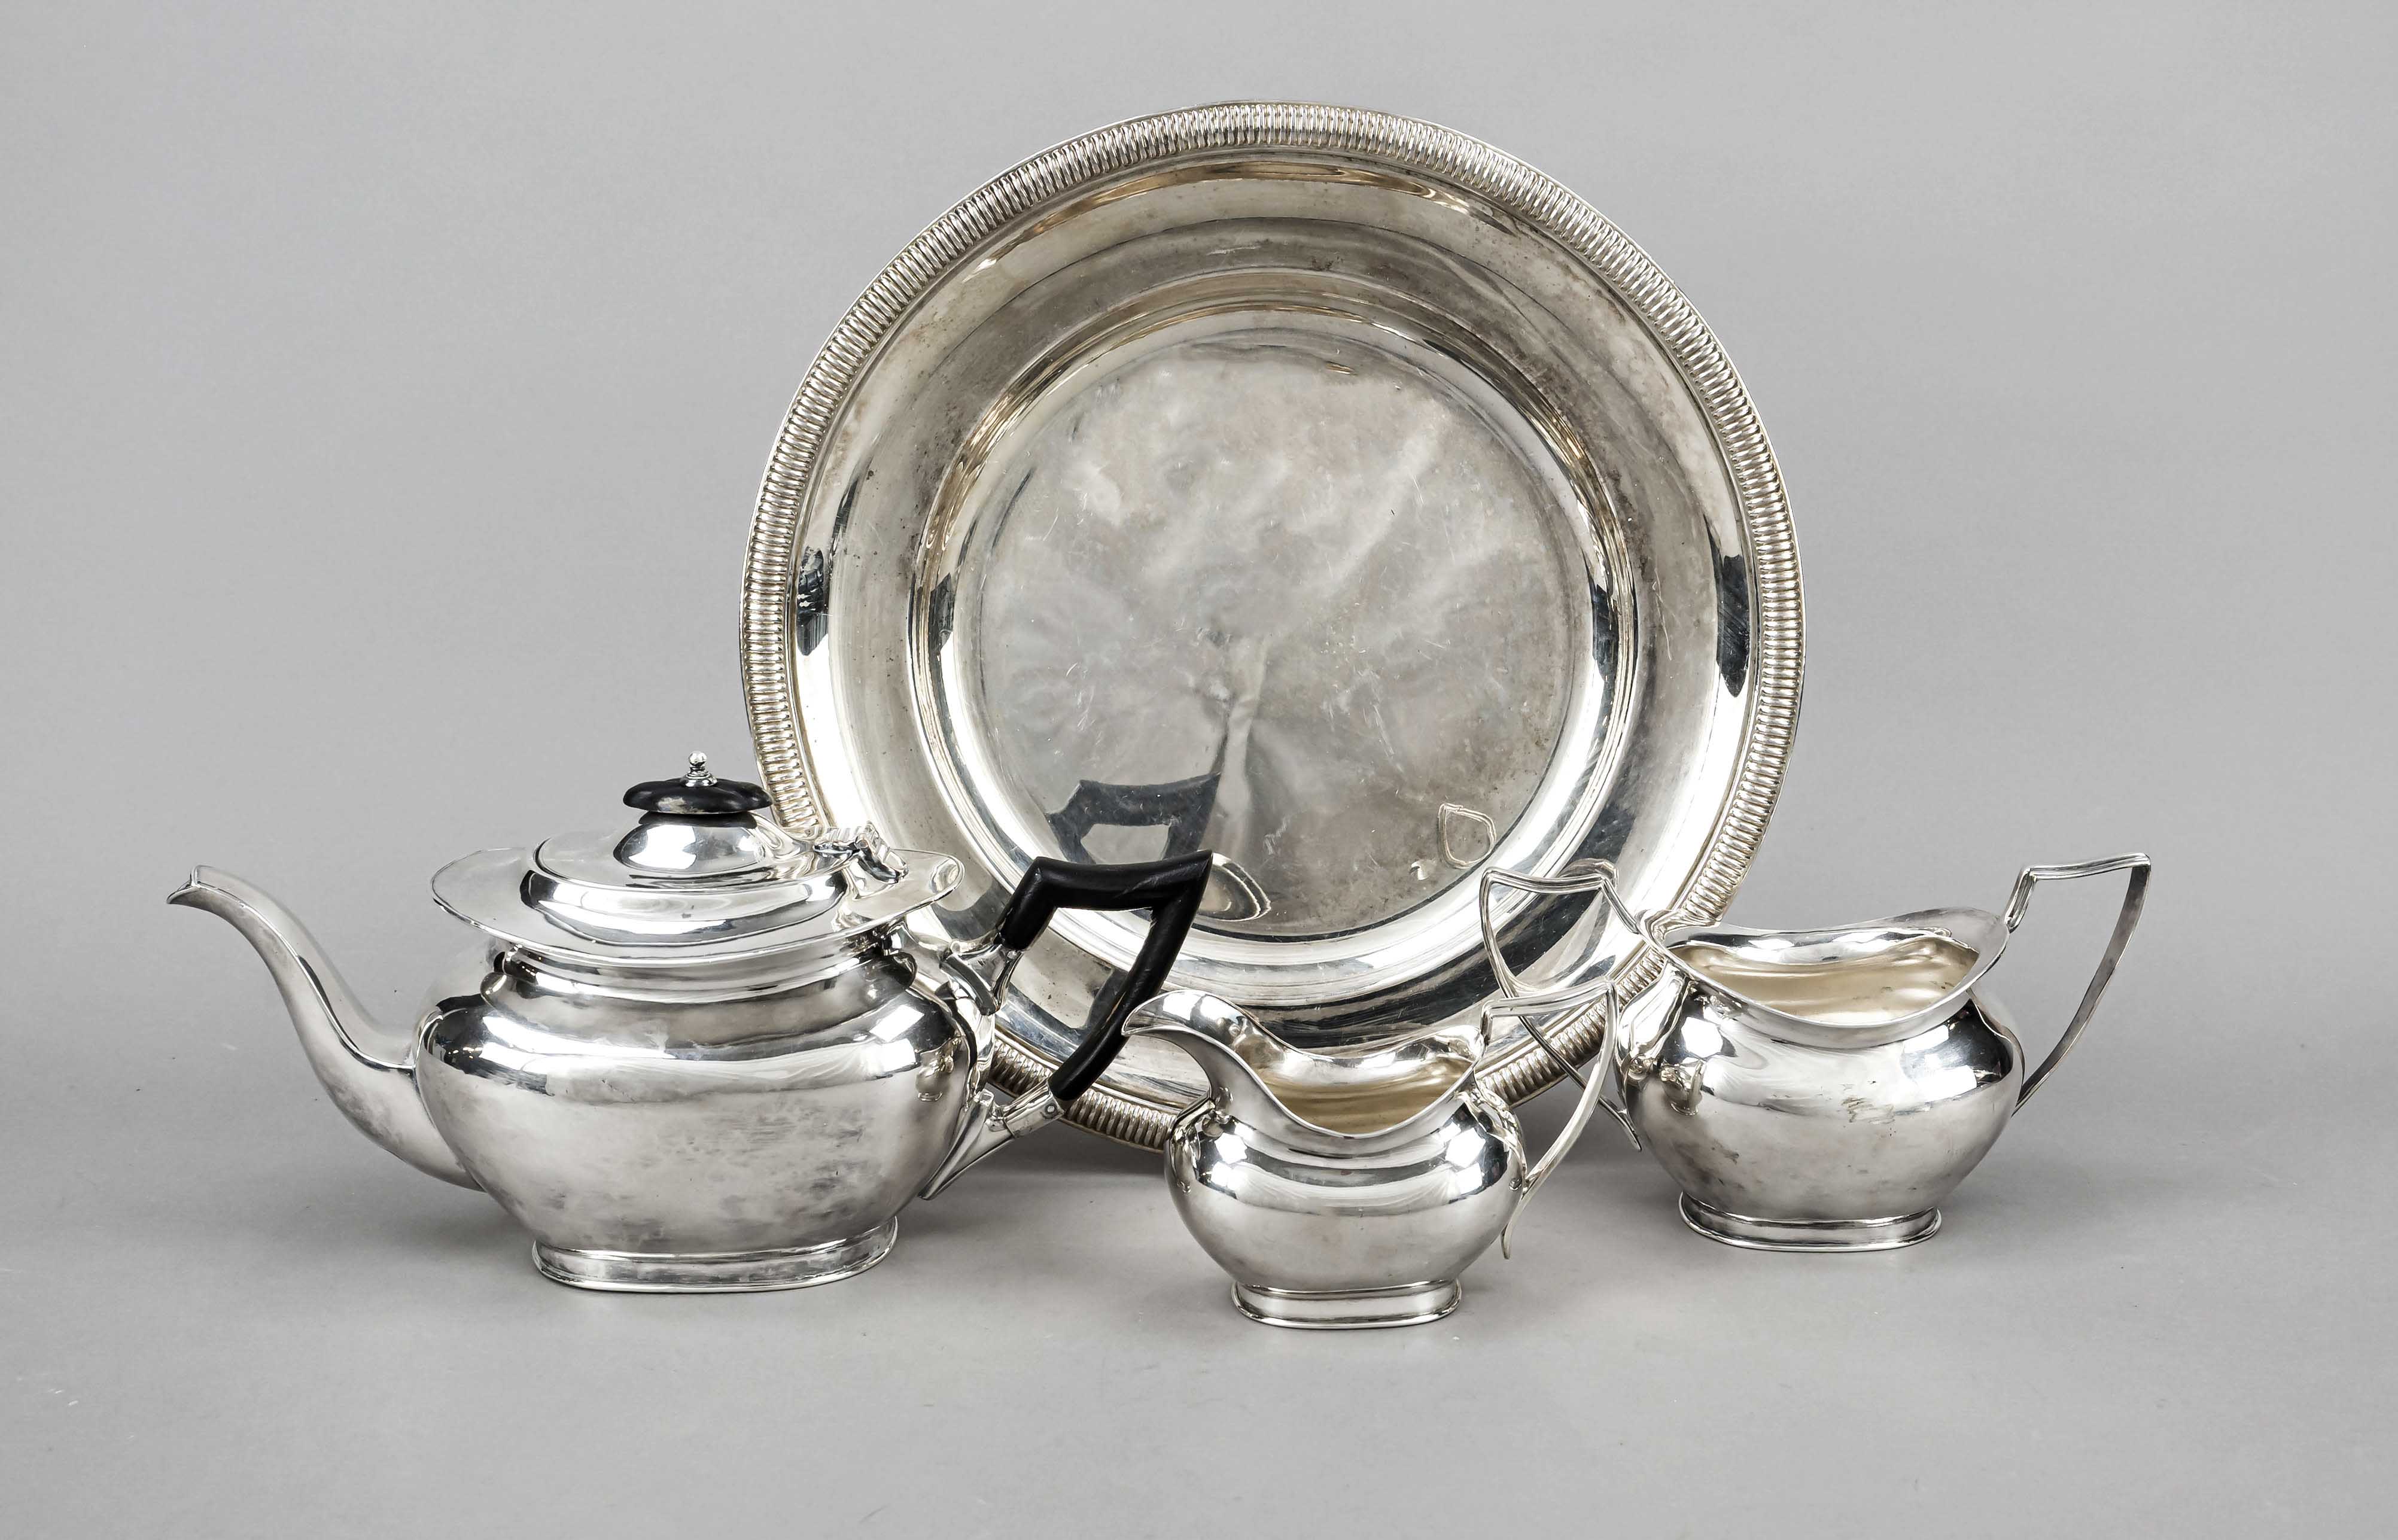 Three-piece tea set, 20th century, plated, rectangular stand with rounded corners, bulbous, smooth